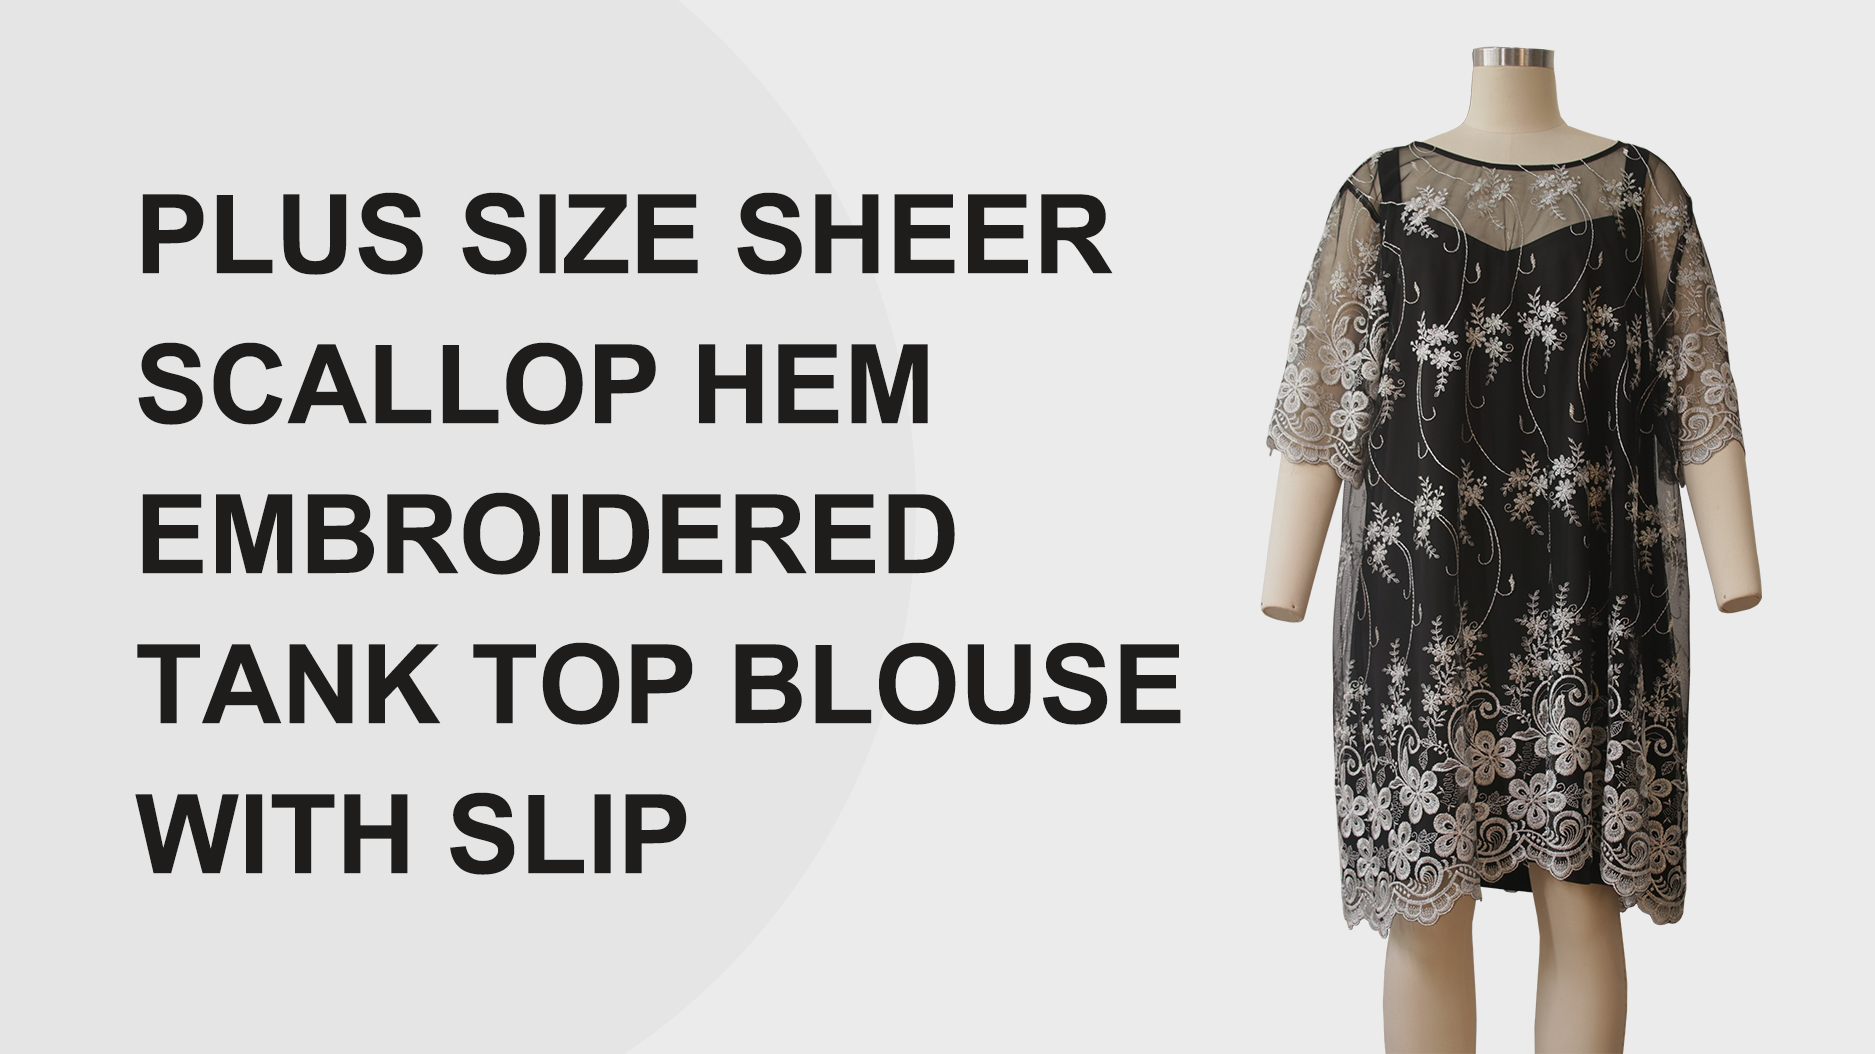 Plus Size Blouse Sheer Scallop Hem Embroidered Tank Top Blouse with Slip Products |Auschalink